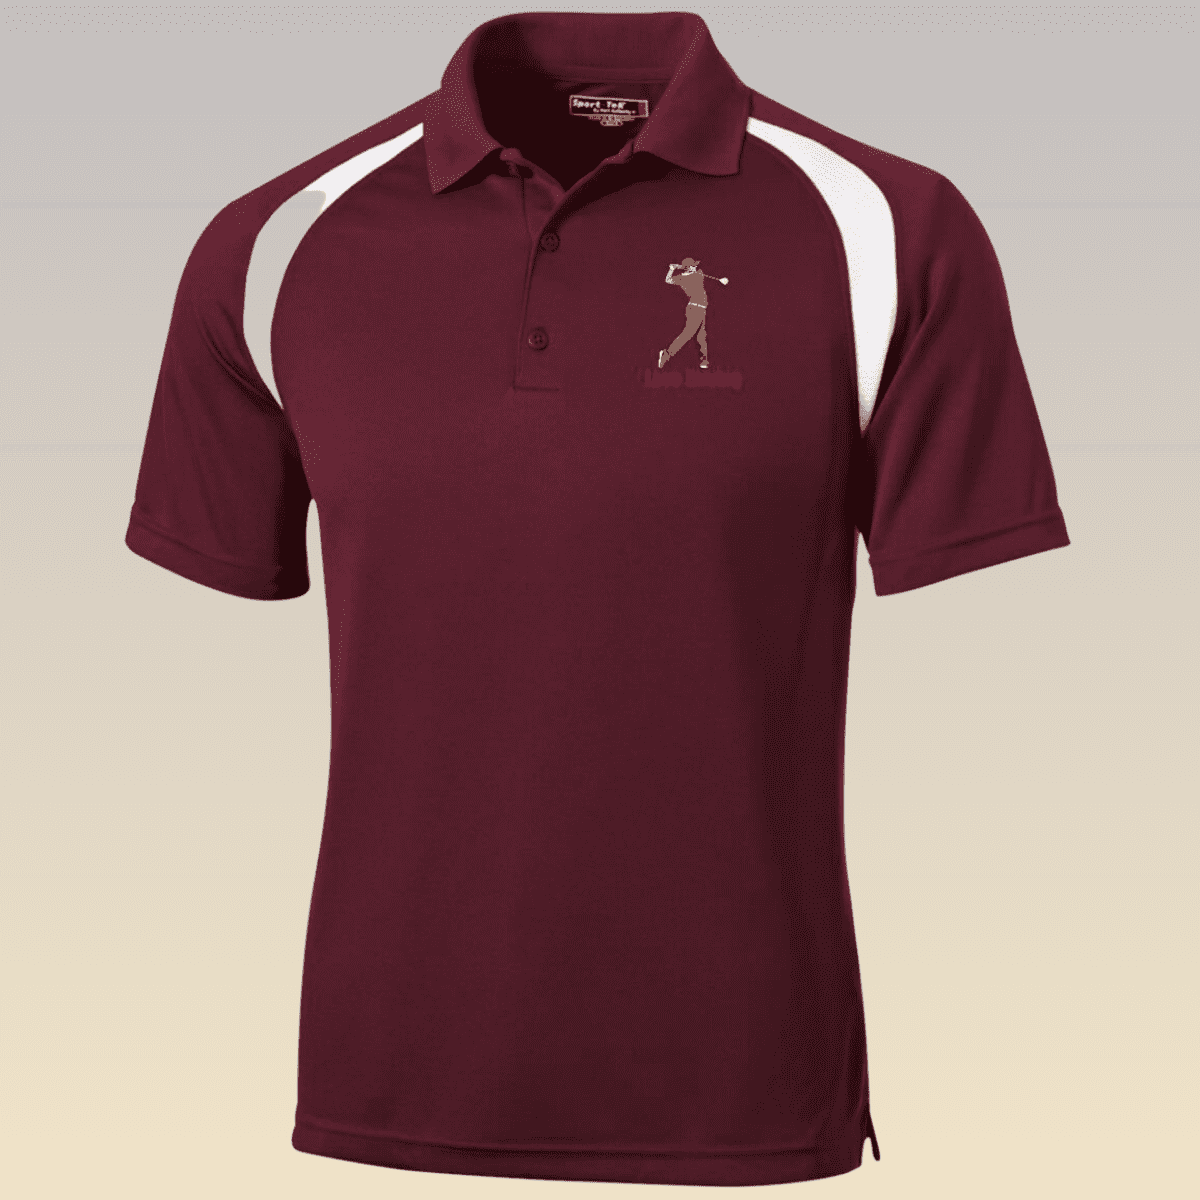 Men's Maroon and White Golf Love Driving Moisture-Wicking Polo Shirt